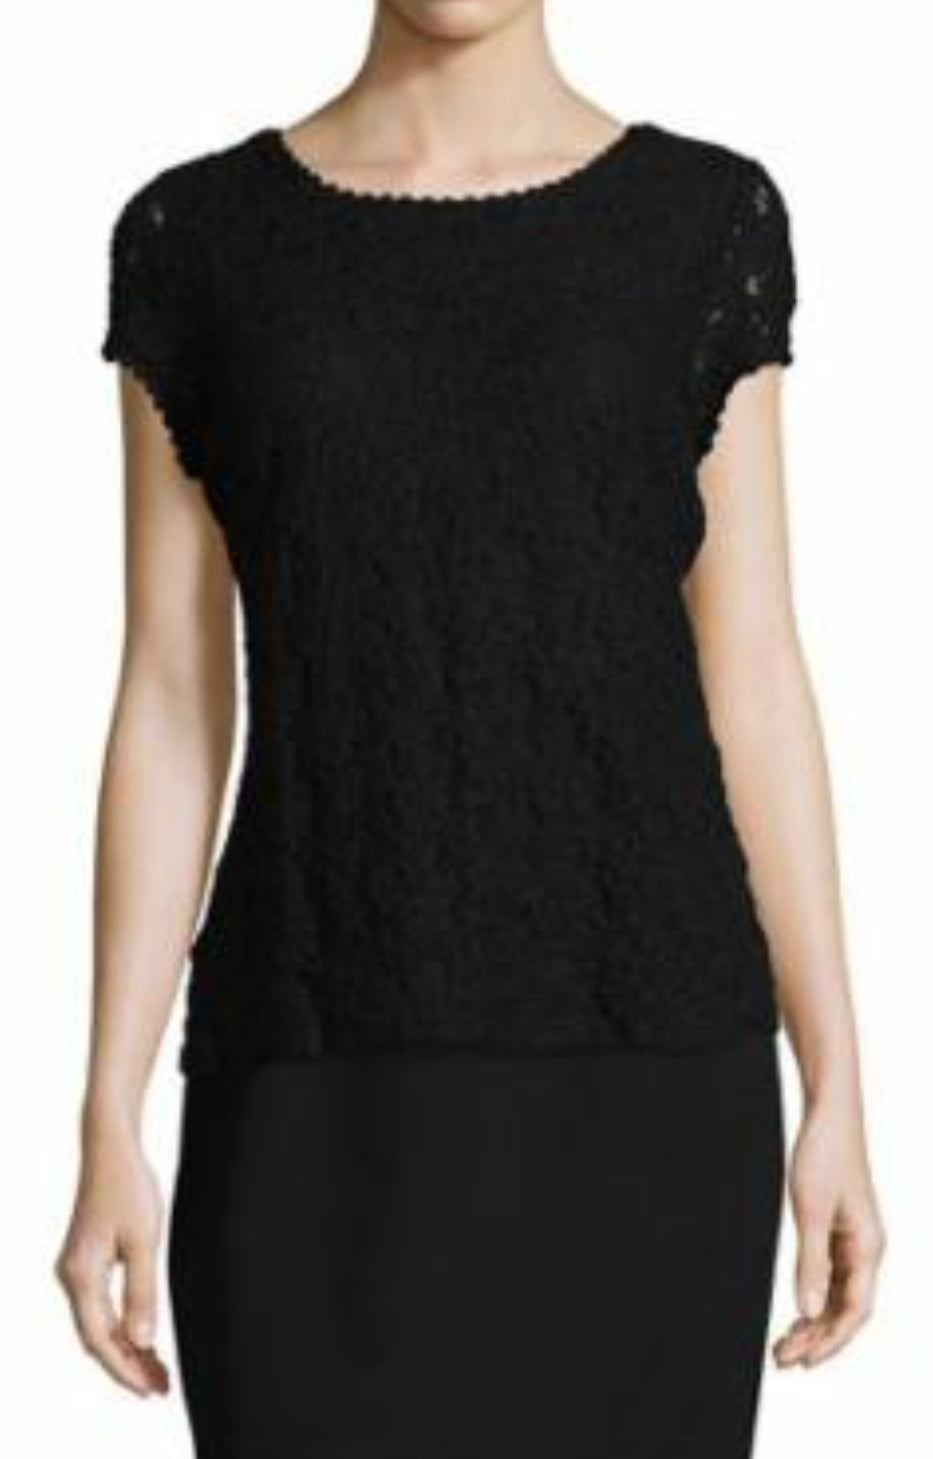 Karl Lagerfeld Paris Women's Lace Cap Sleeve Tee - Black - Size L L Dresses by Brands Overstock | Brands Overstock